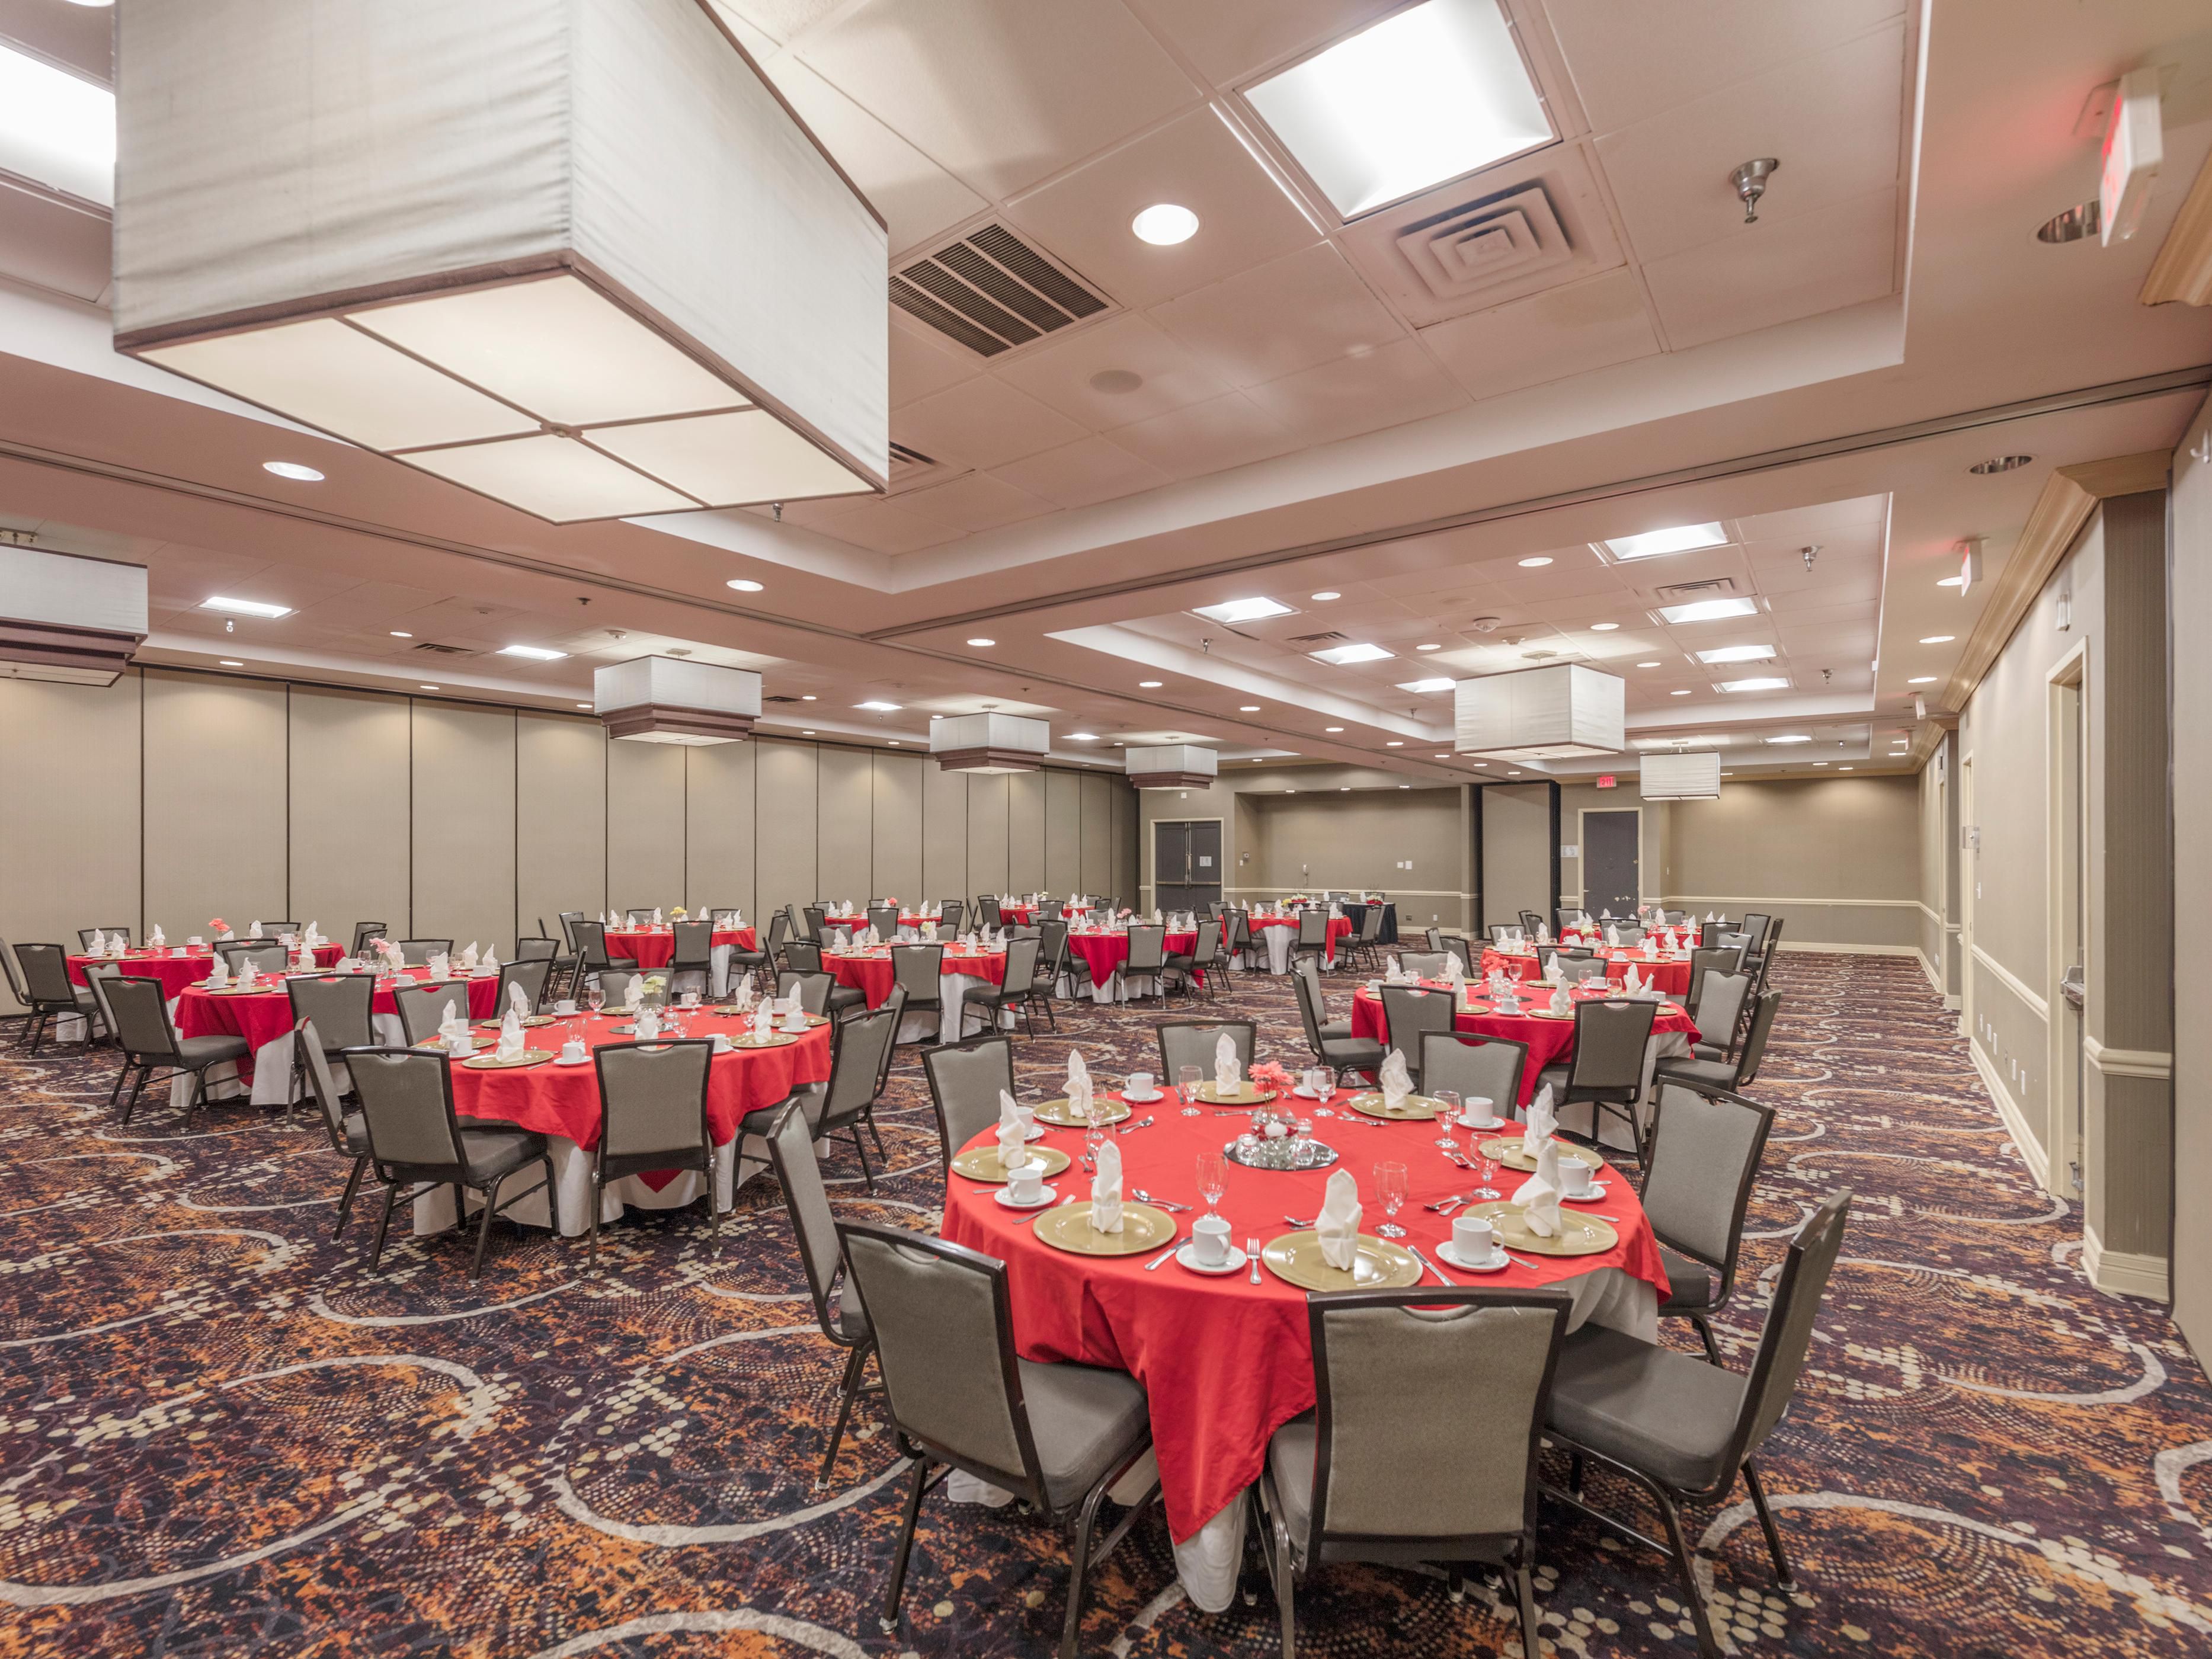 Looking for an event venue in Austin? Look no further than Holiday Inn Austin Midtown! Our event spaces can accommodate meetings, conferences, weddings, and other events of various sizes, with state-of-the-art audiovisual equipment and high-speed Wi-Fi. With on-site parking and exceptional service, we are the perfect choice for your next event.